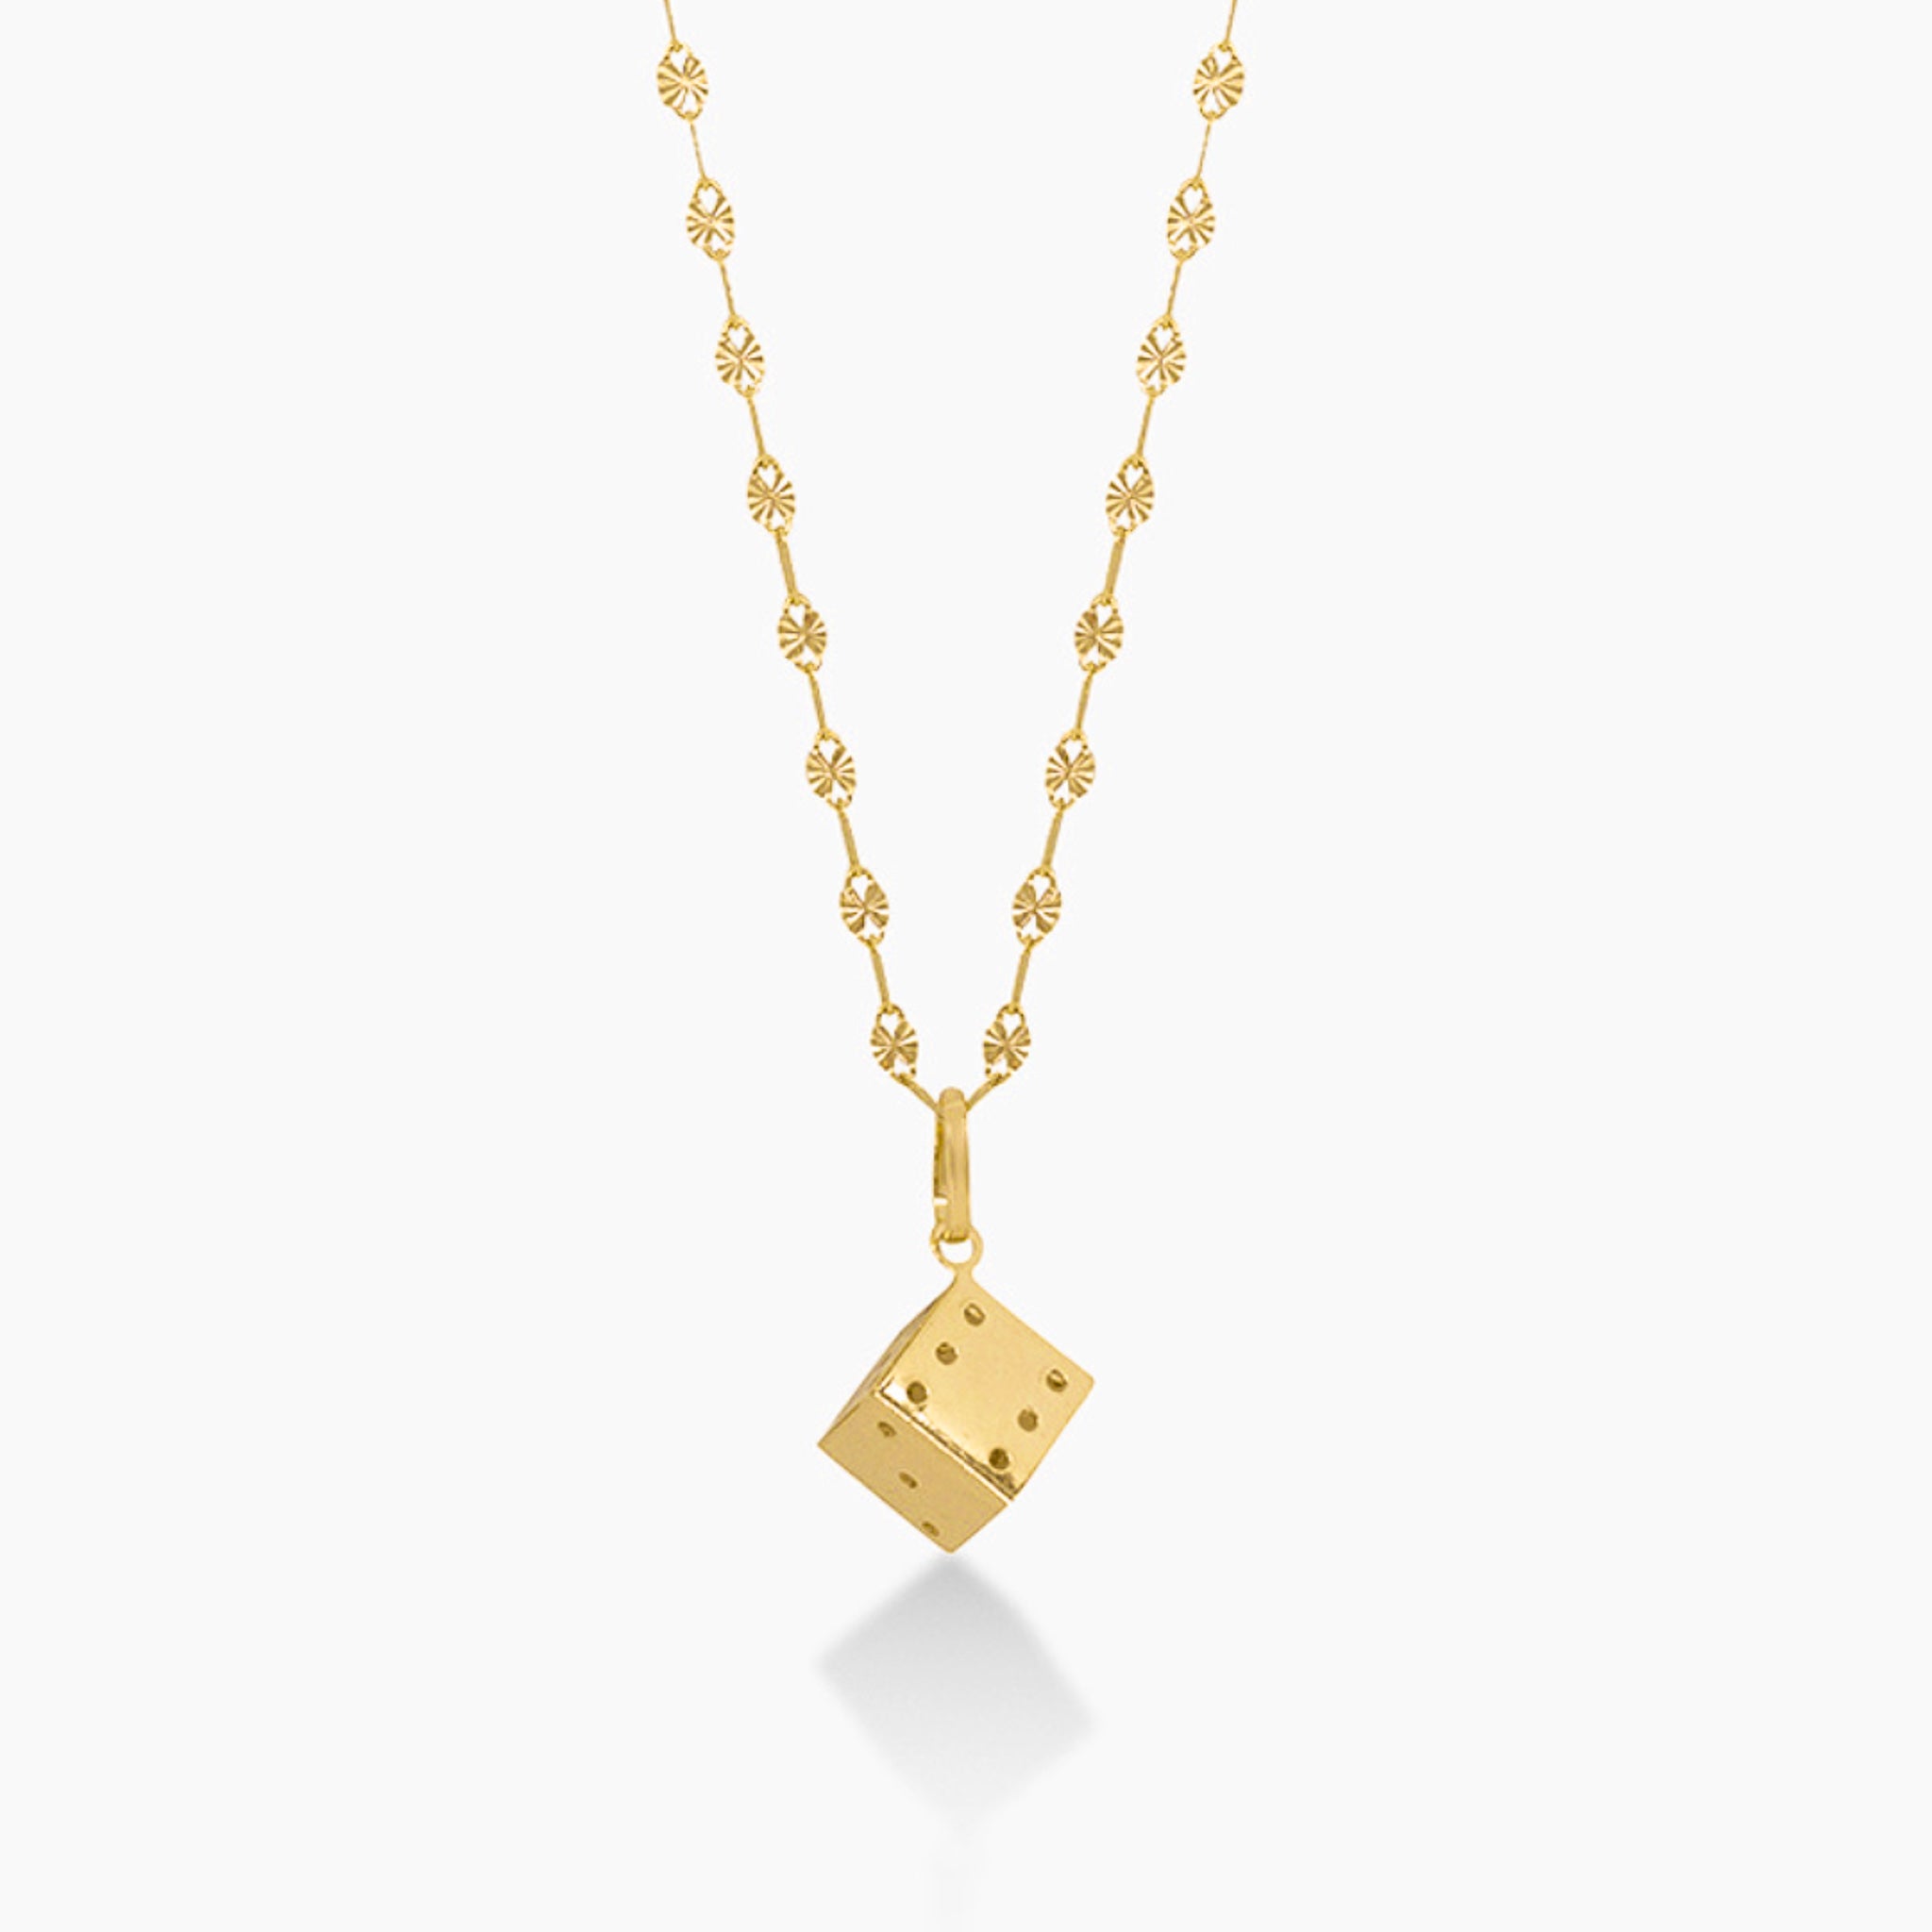 14K YELLOW GOLD ROLLING FORTUNE DICE NECKLACE